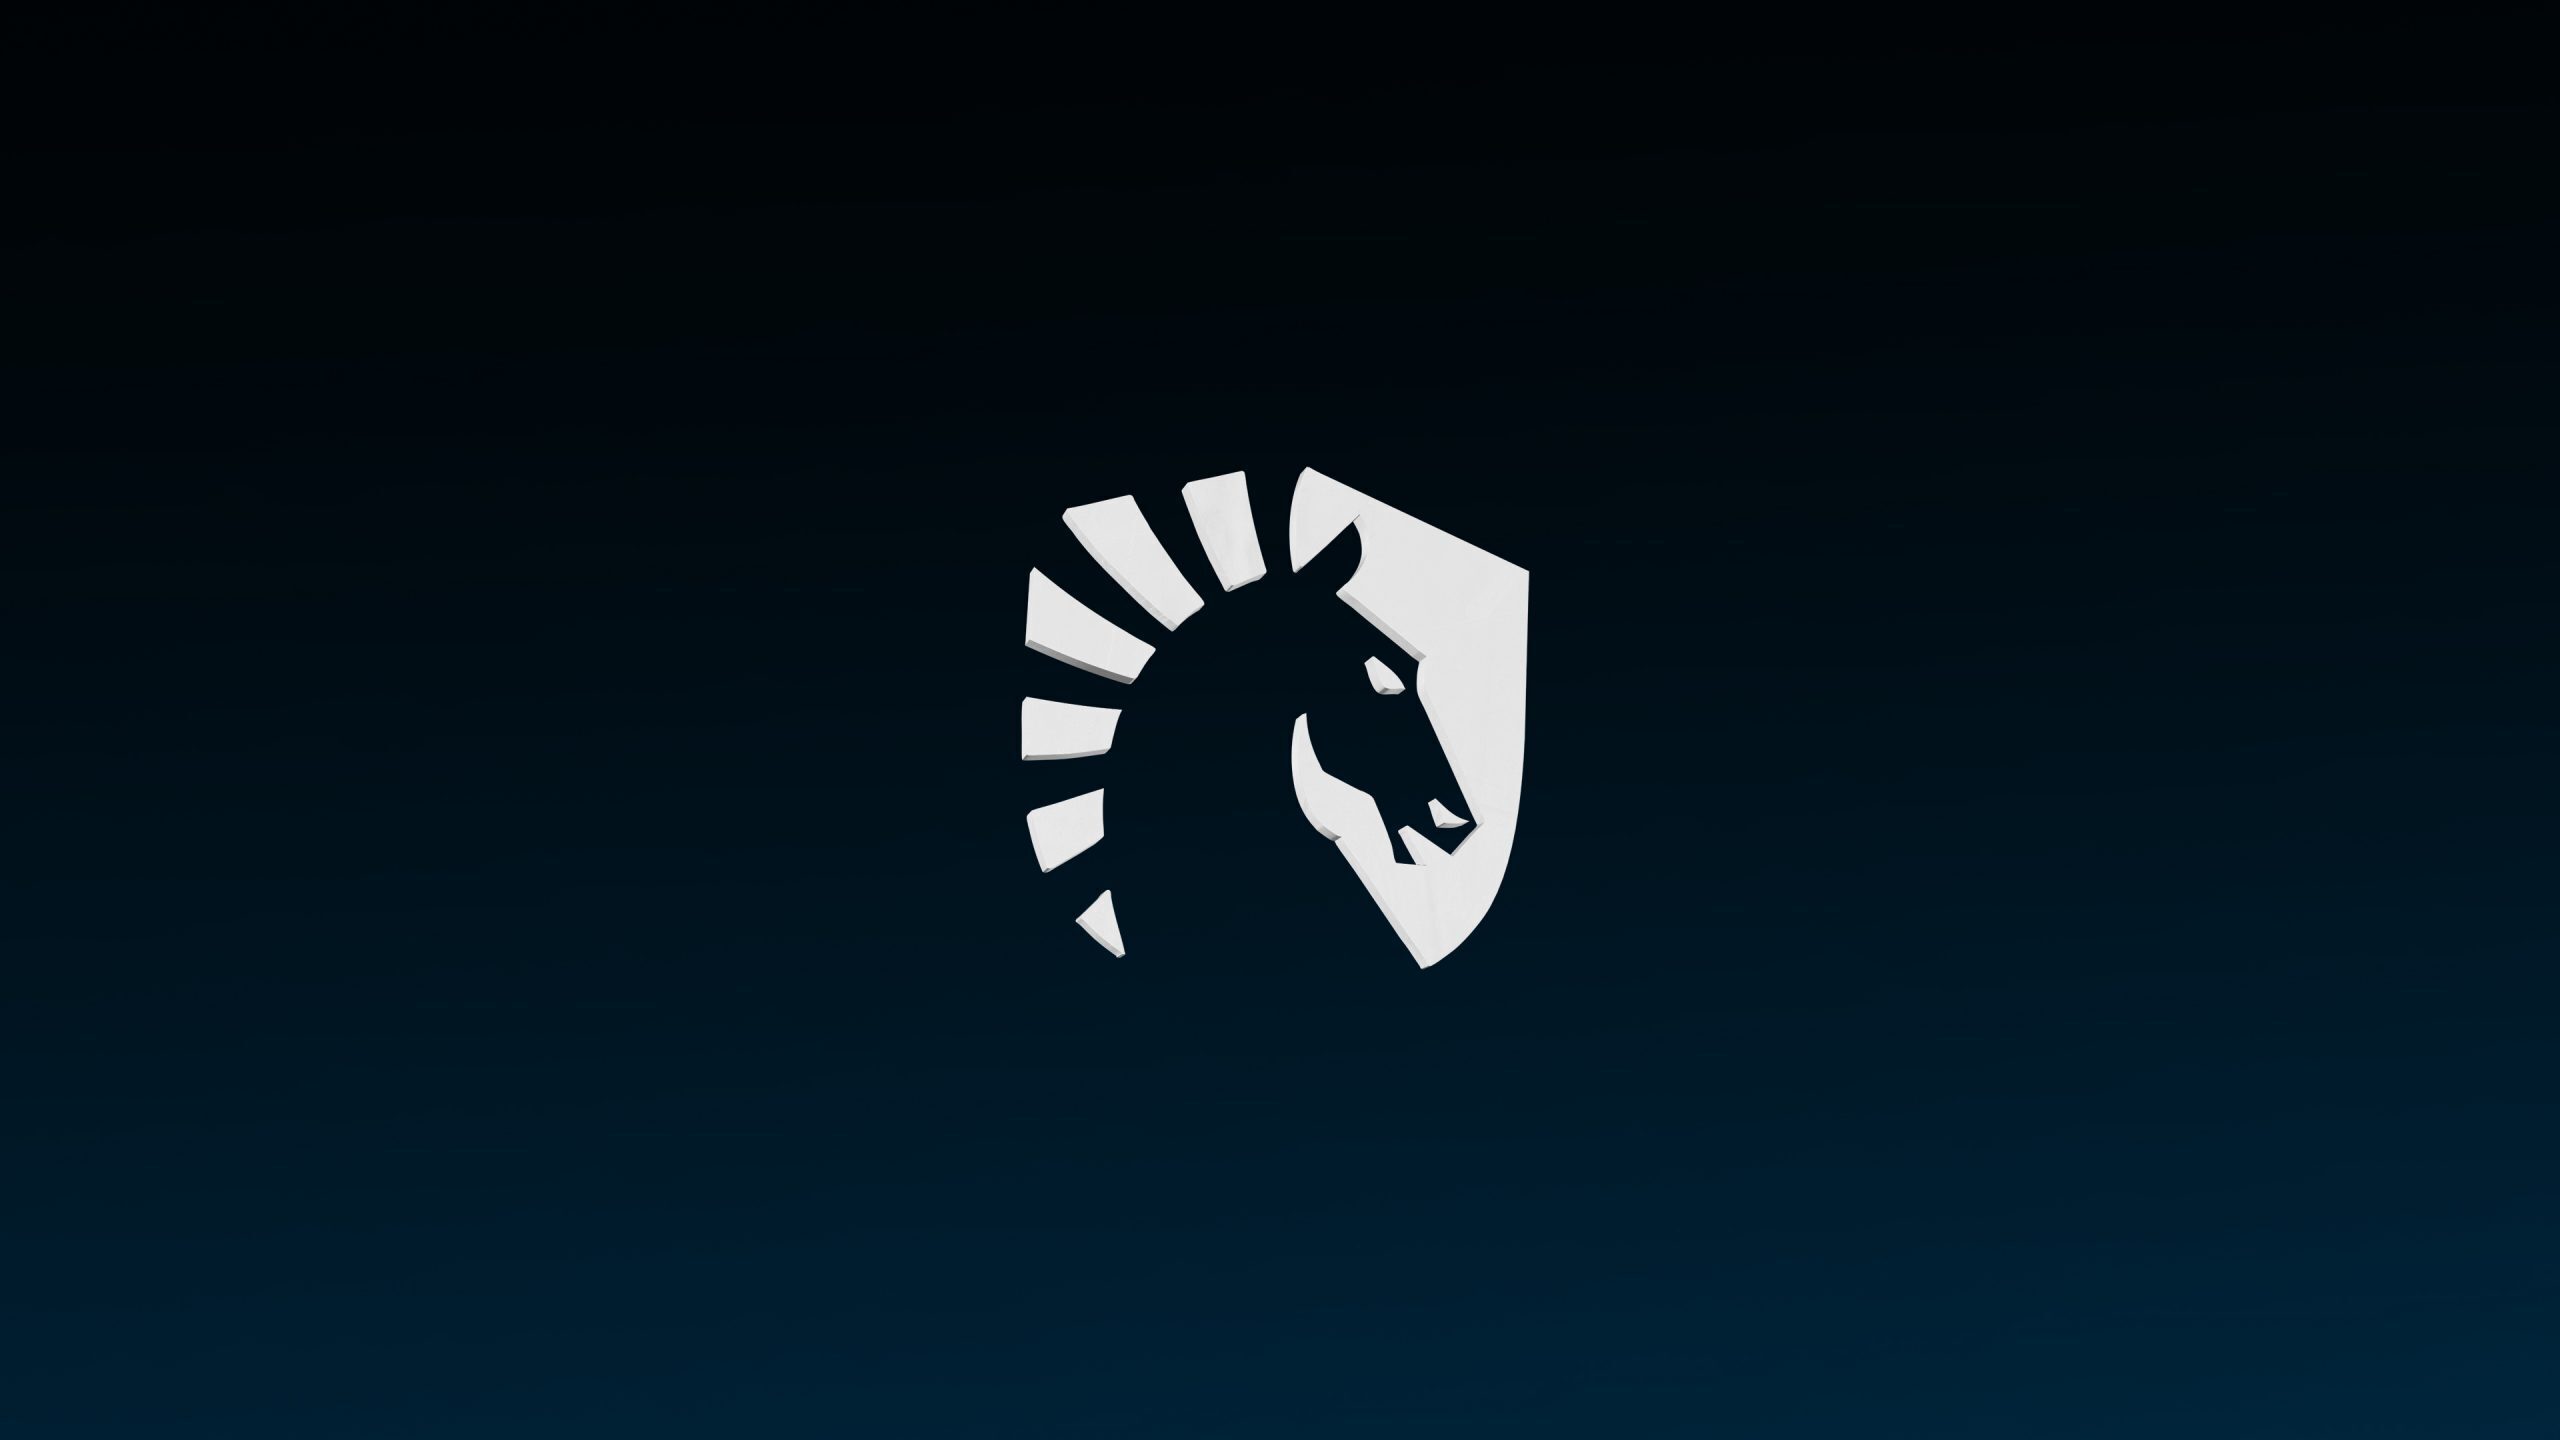 Team Liquid has partnered with MMA organization Professional Fighters League (PFL) in a deal that will see members of Liquid attend and promote PFL events.